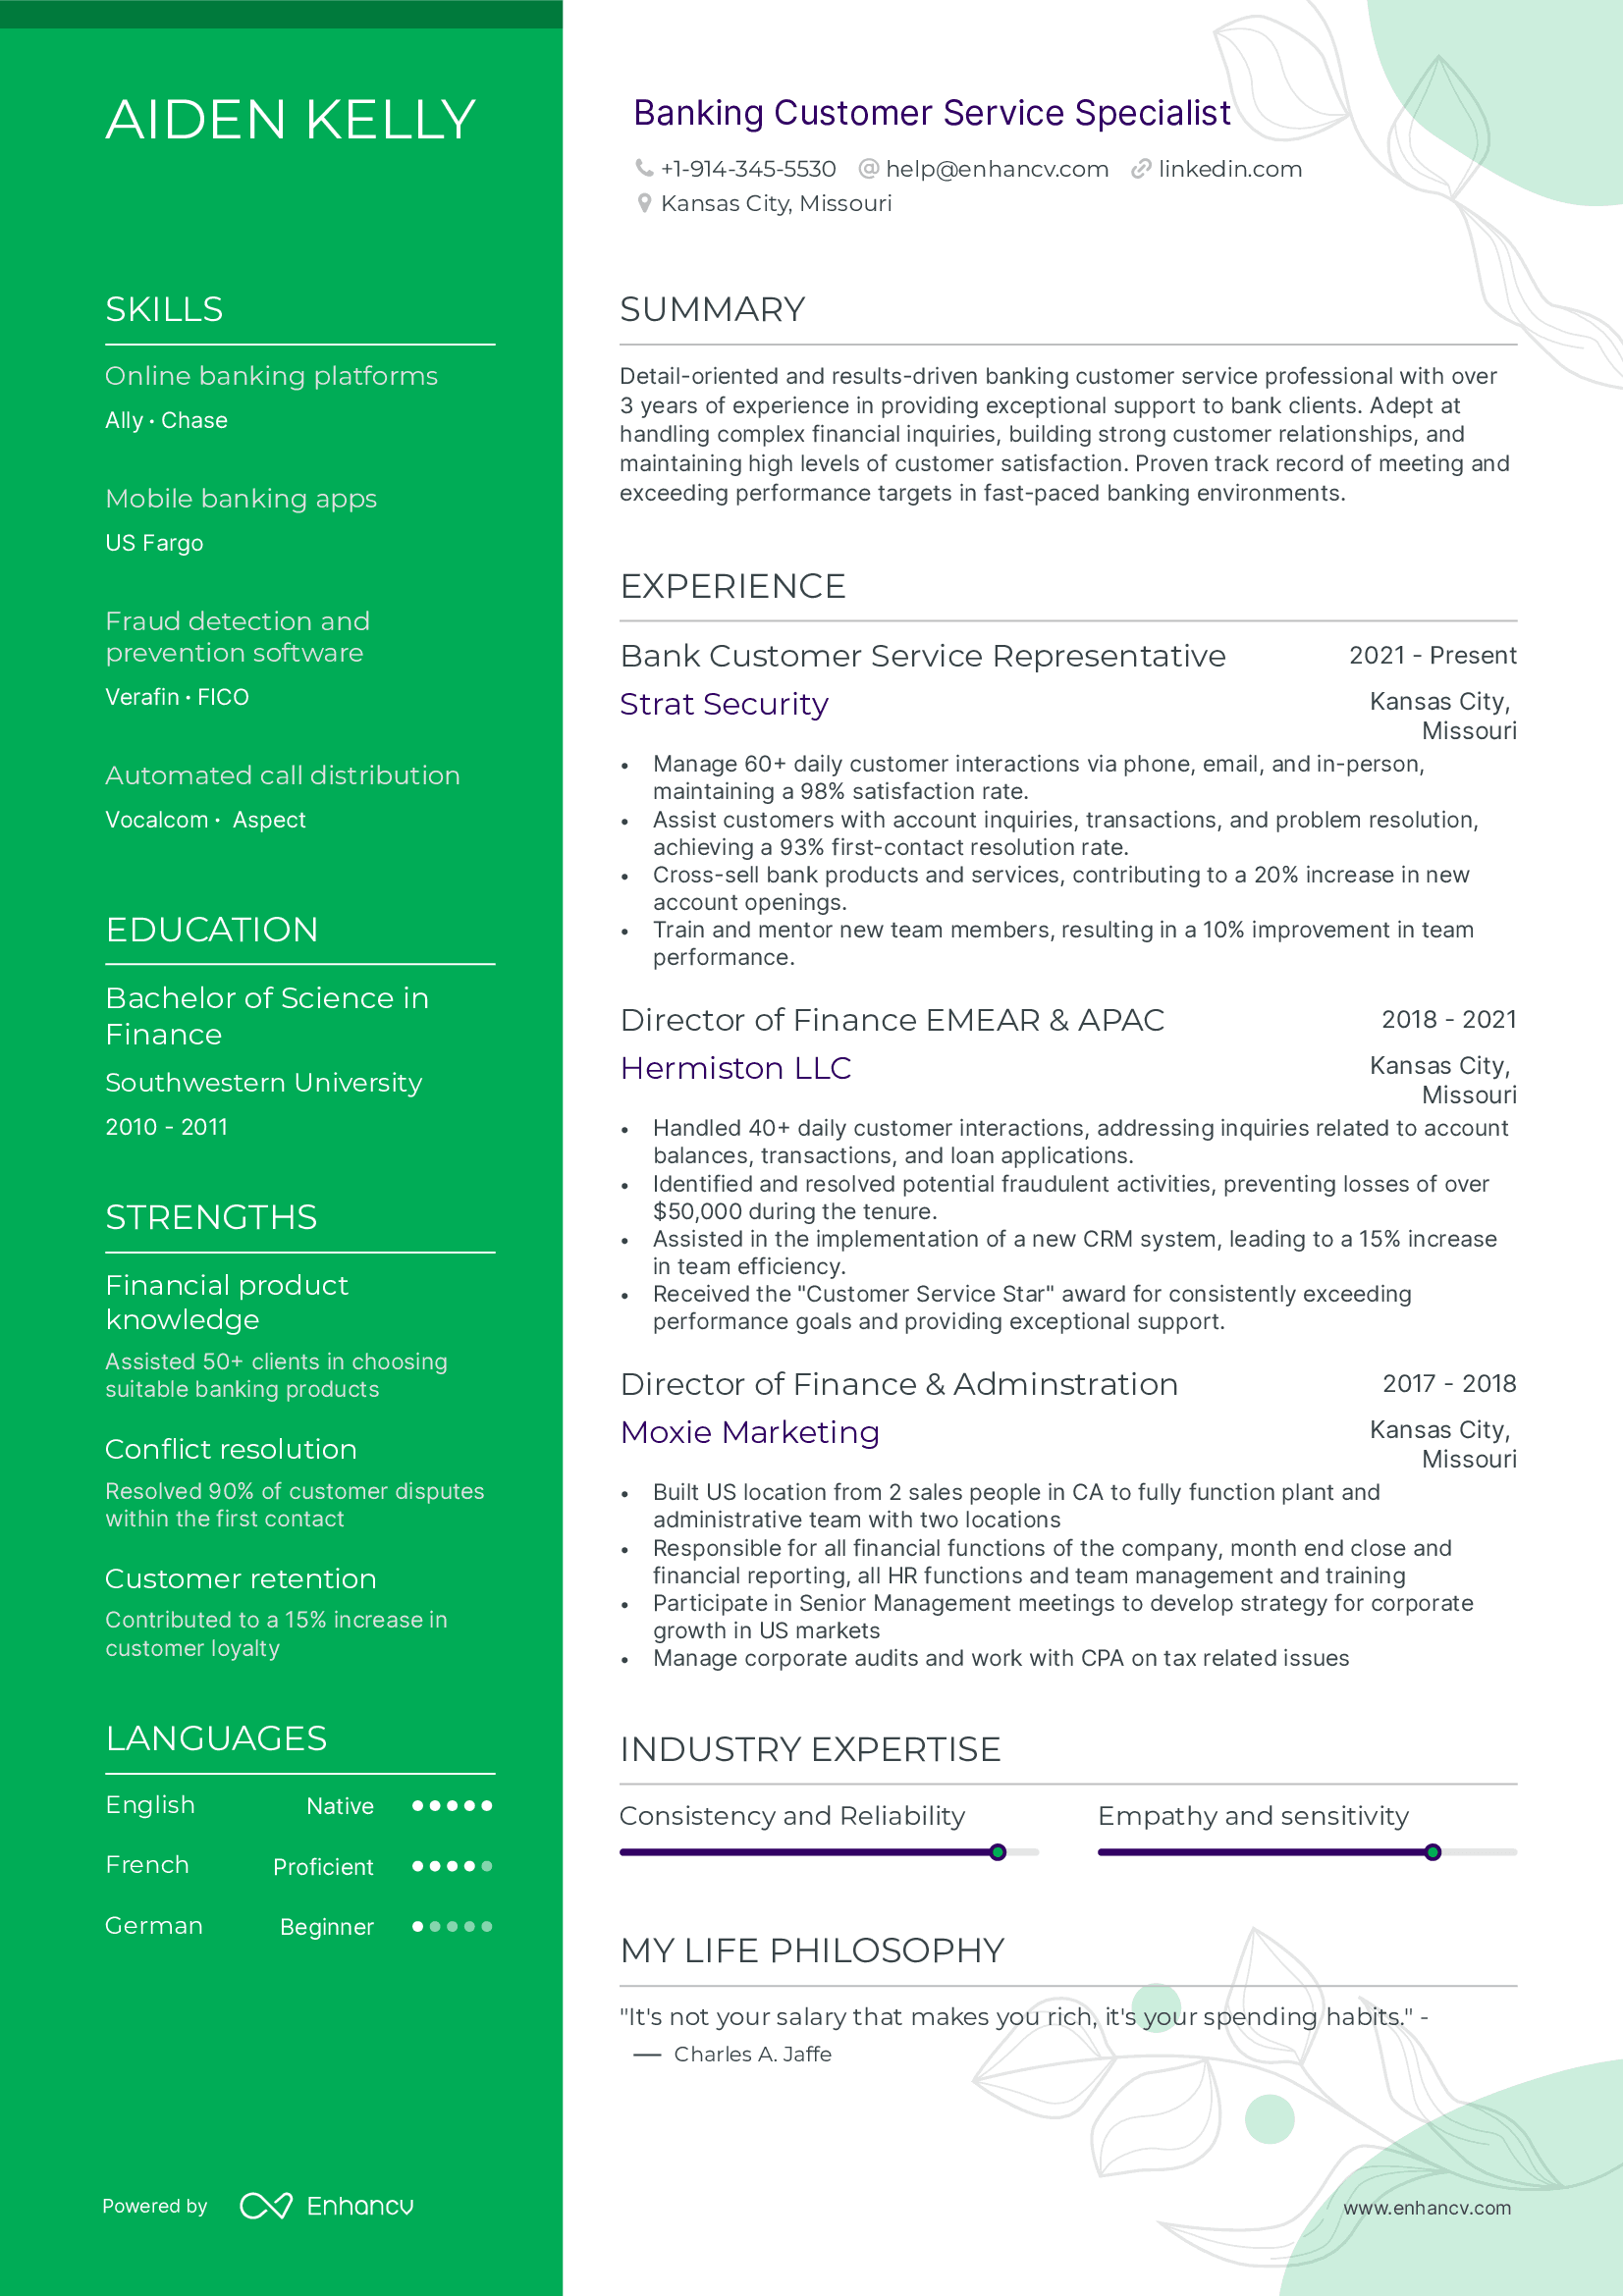 Banking Customer Service Specialist resume example